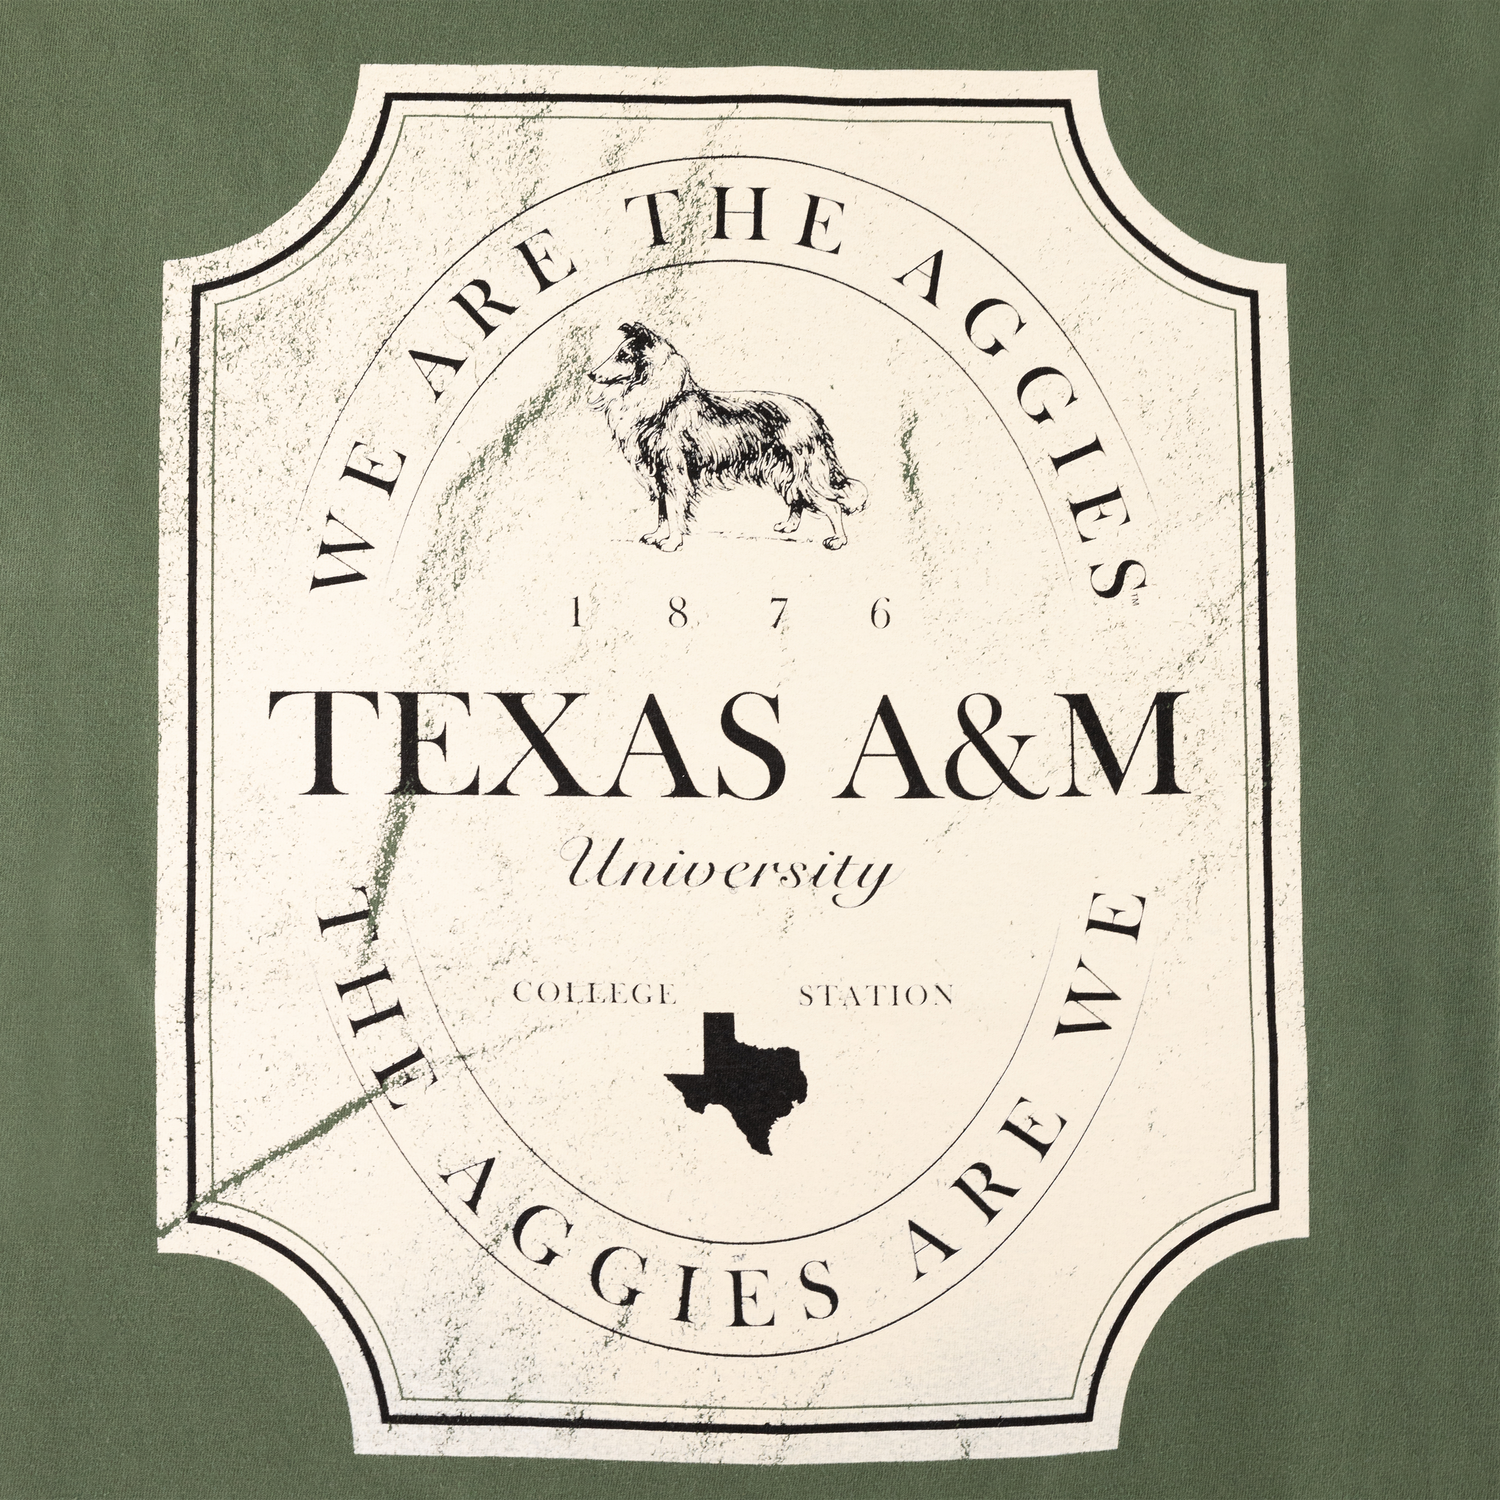 Texas A&M We are the Aggies Reveille T-Shirt